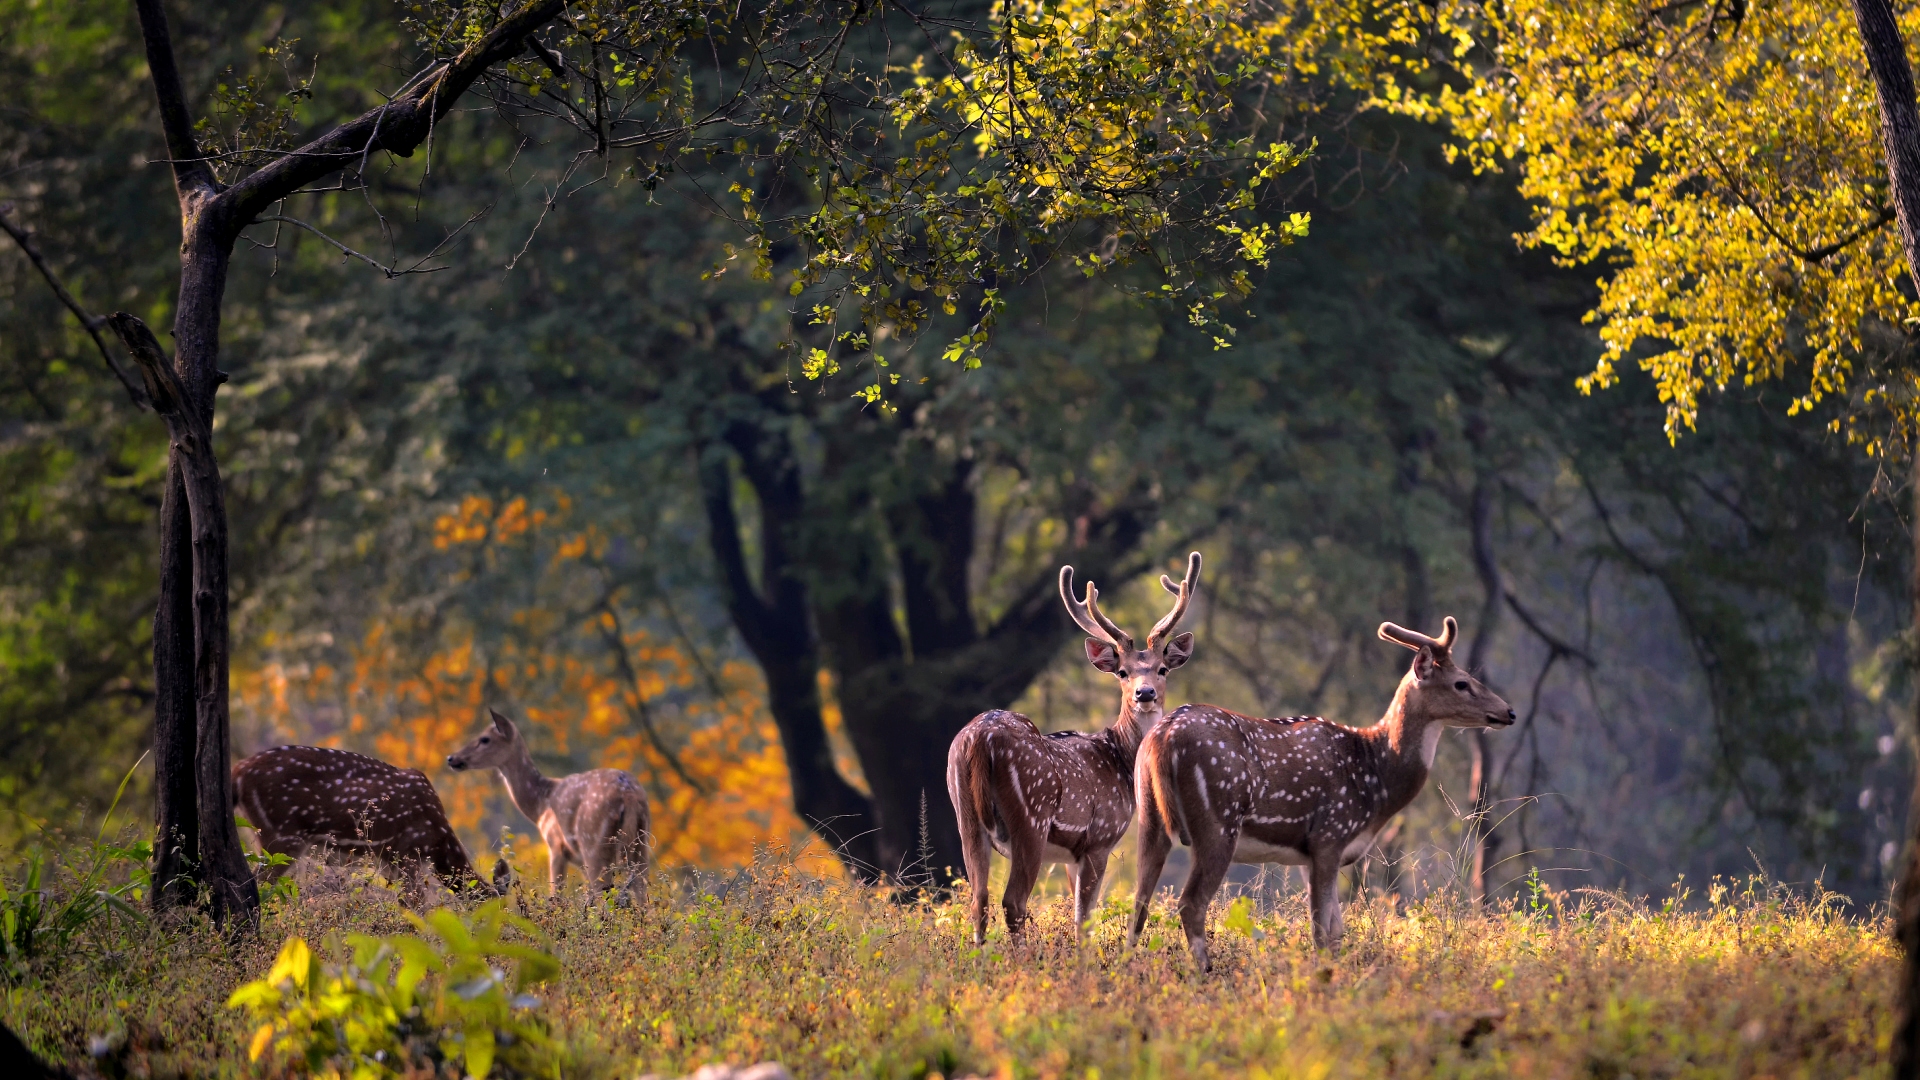 Kanha National Park or Tiger Reserve is one of the most beautiful and largest National Park located in  Madhya Pradesh, India.